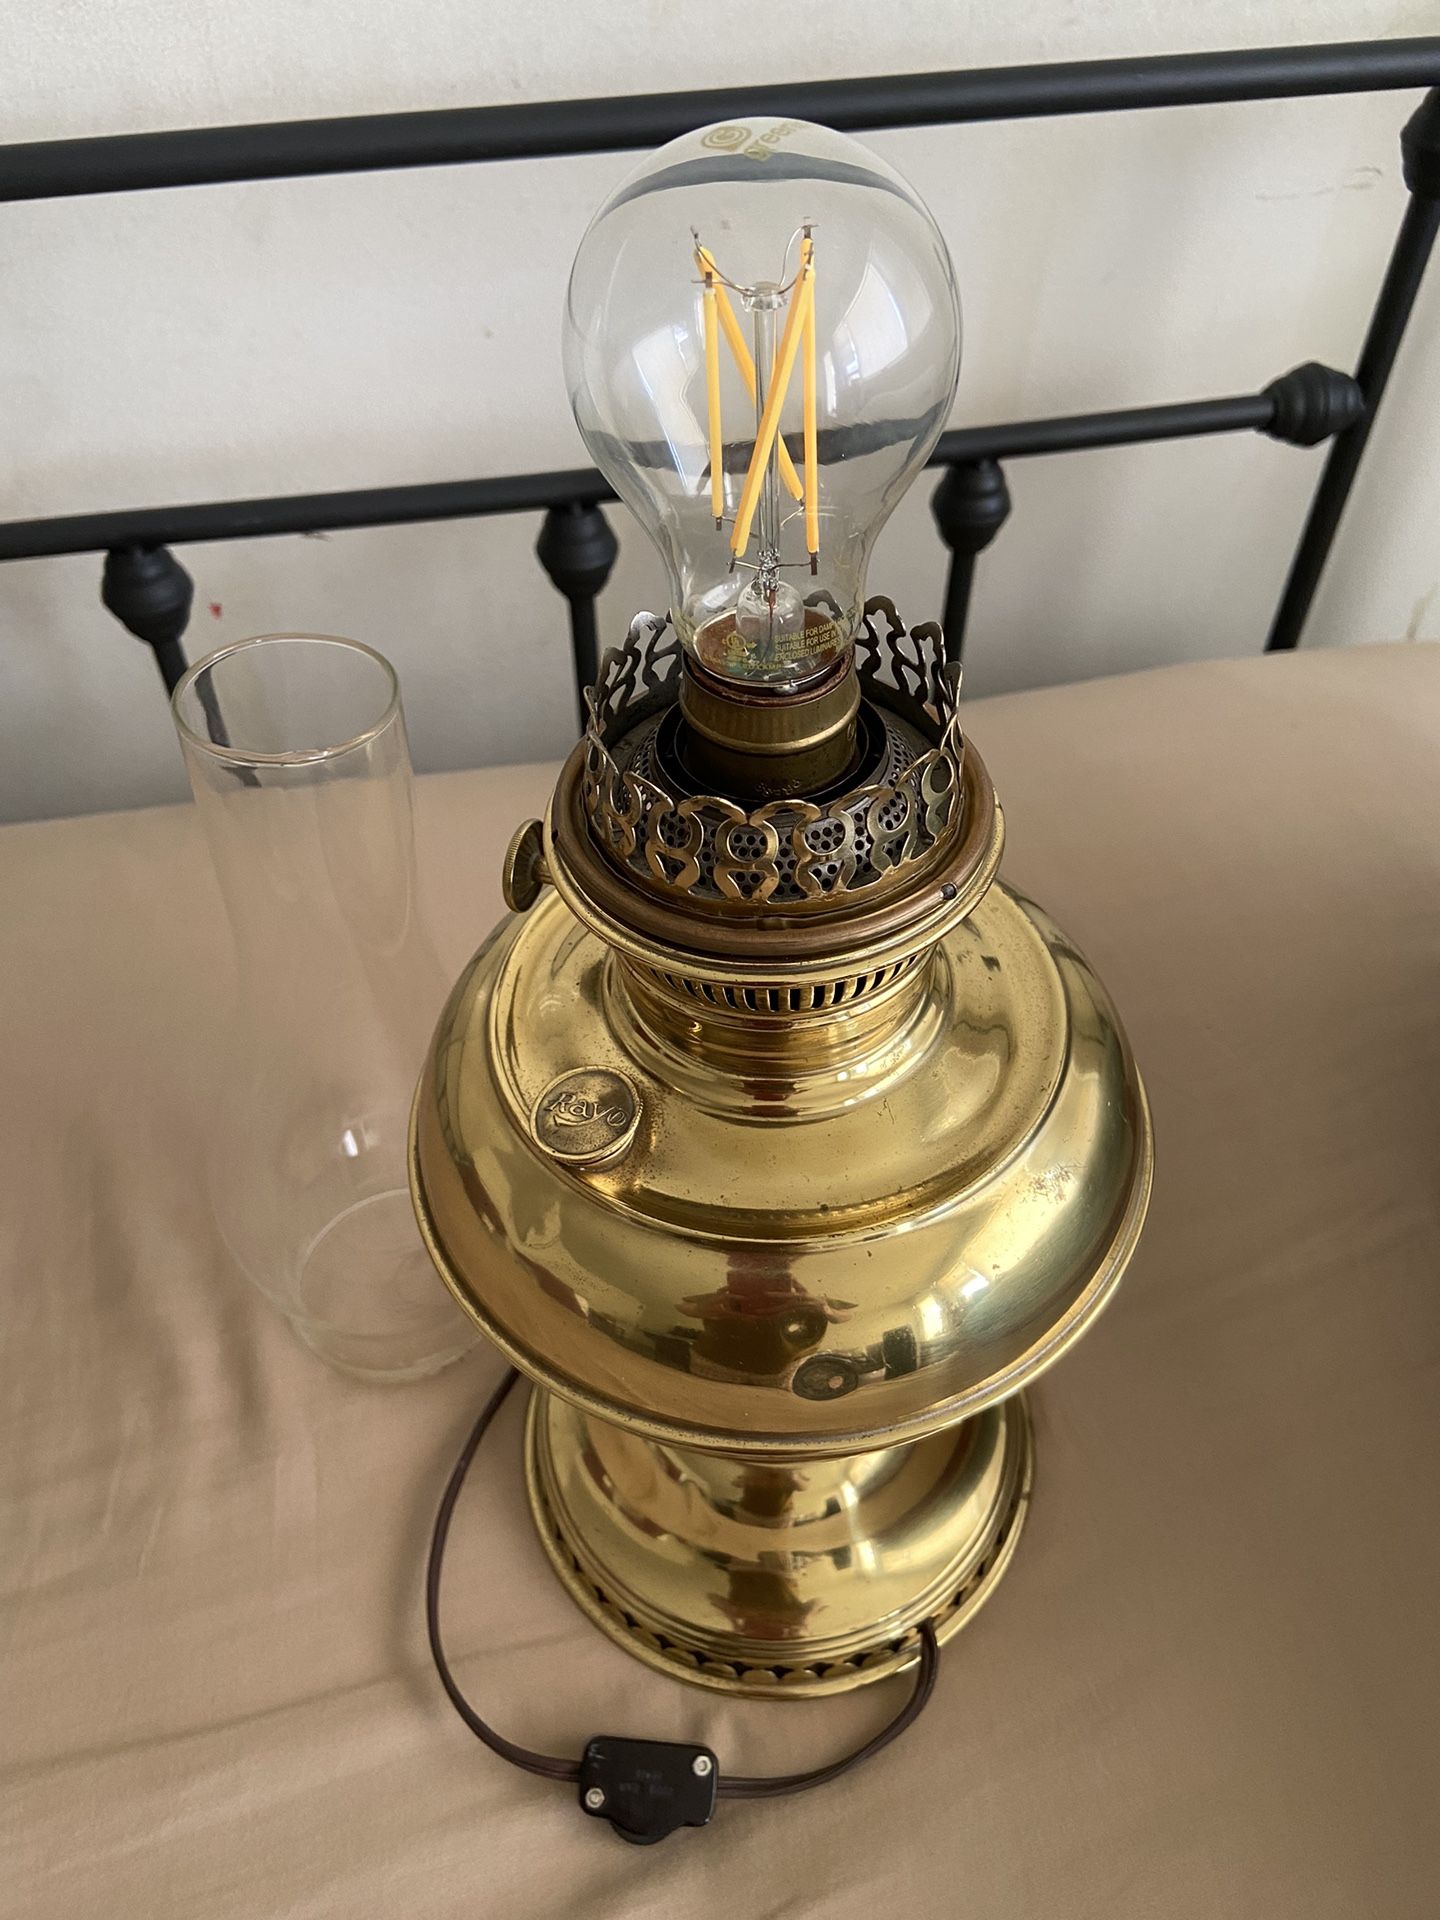 Antique Brass Rayo Oil Lamp, Electrified Works Great.